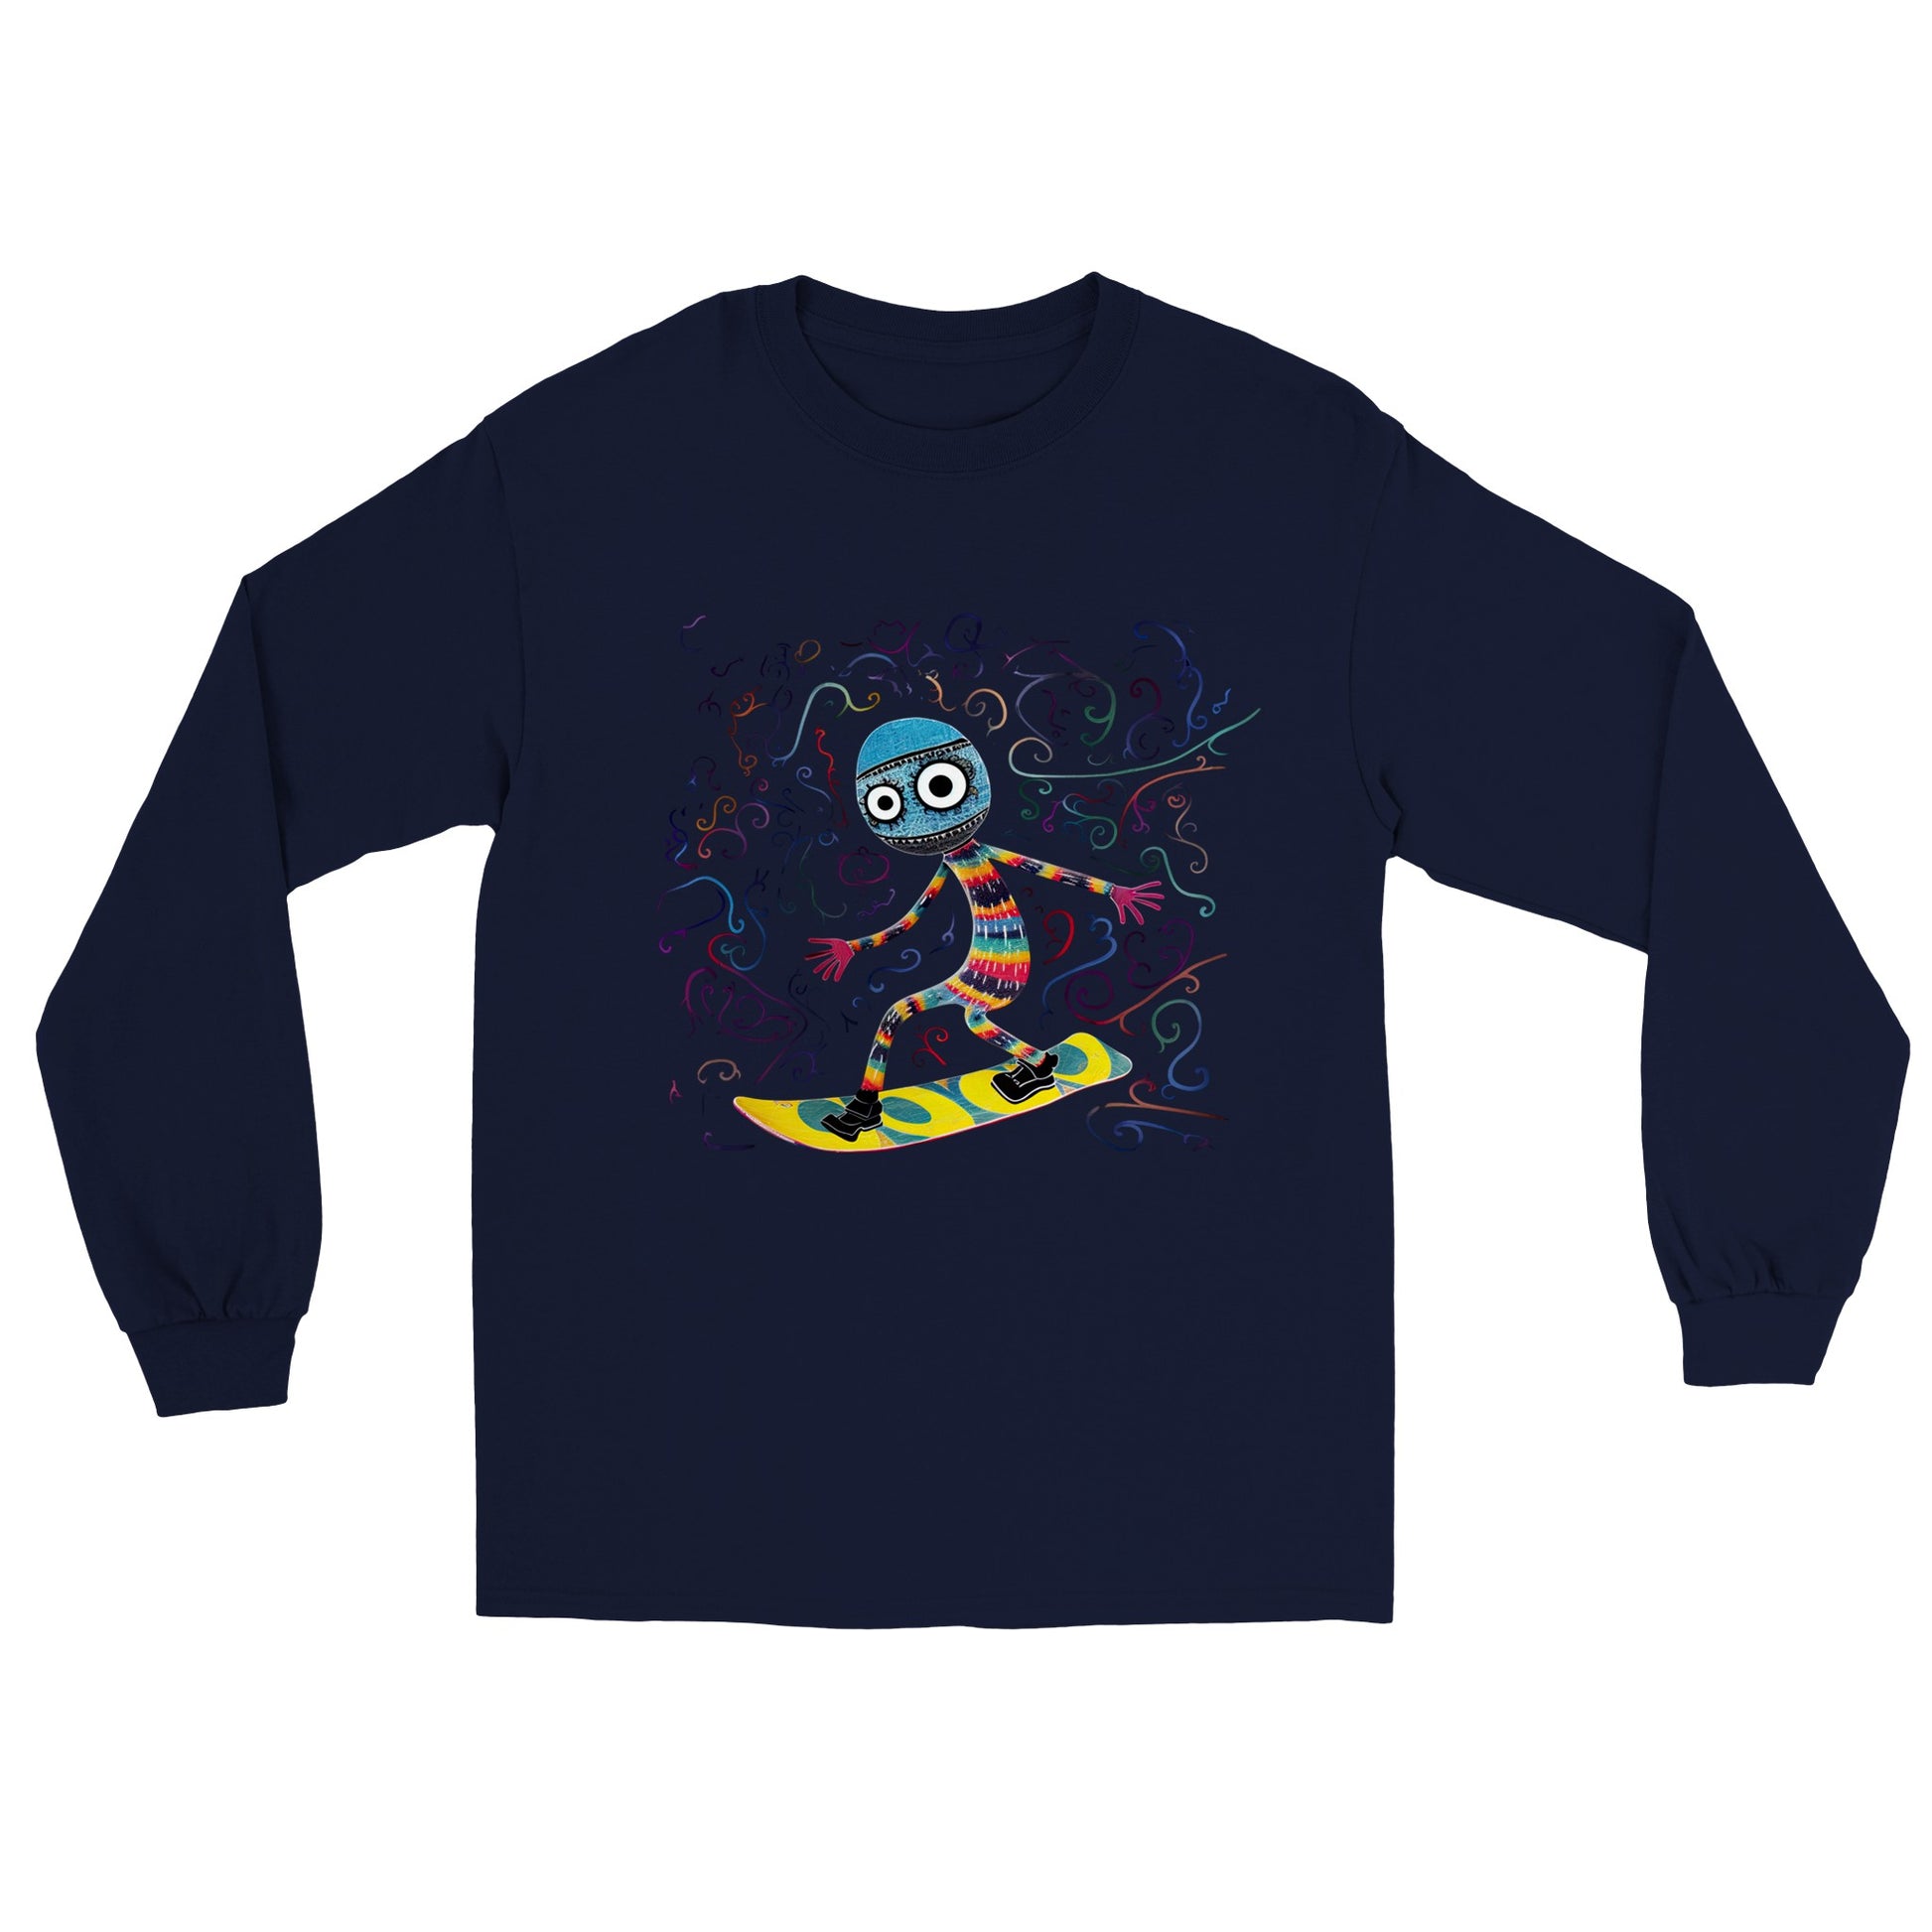 navy blue long sleeve t-shirt with an abstract snowboarder print